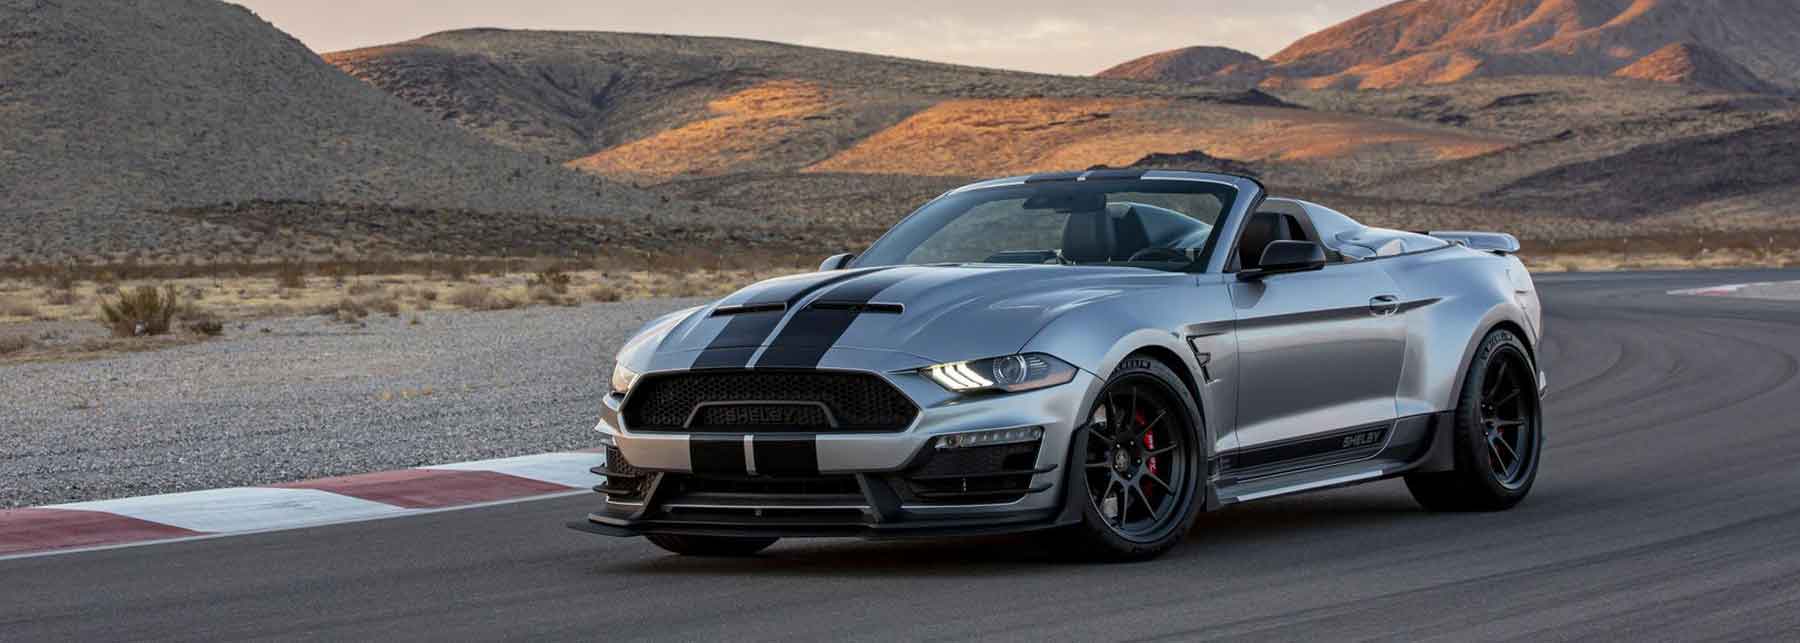 Shelby Super Snake order book now open